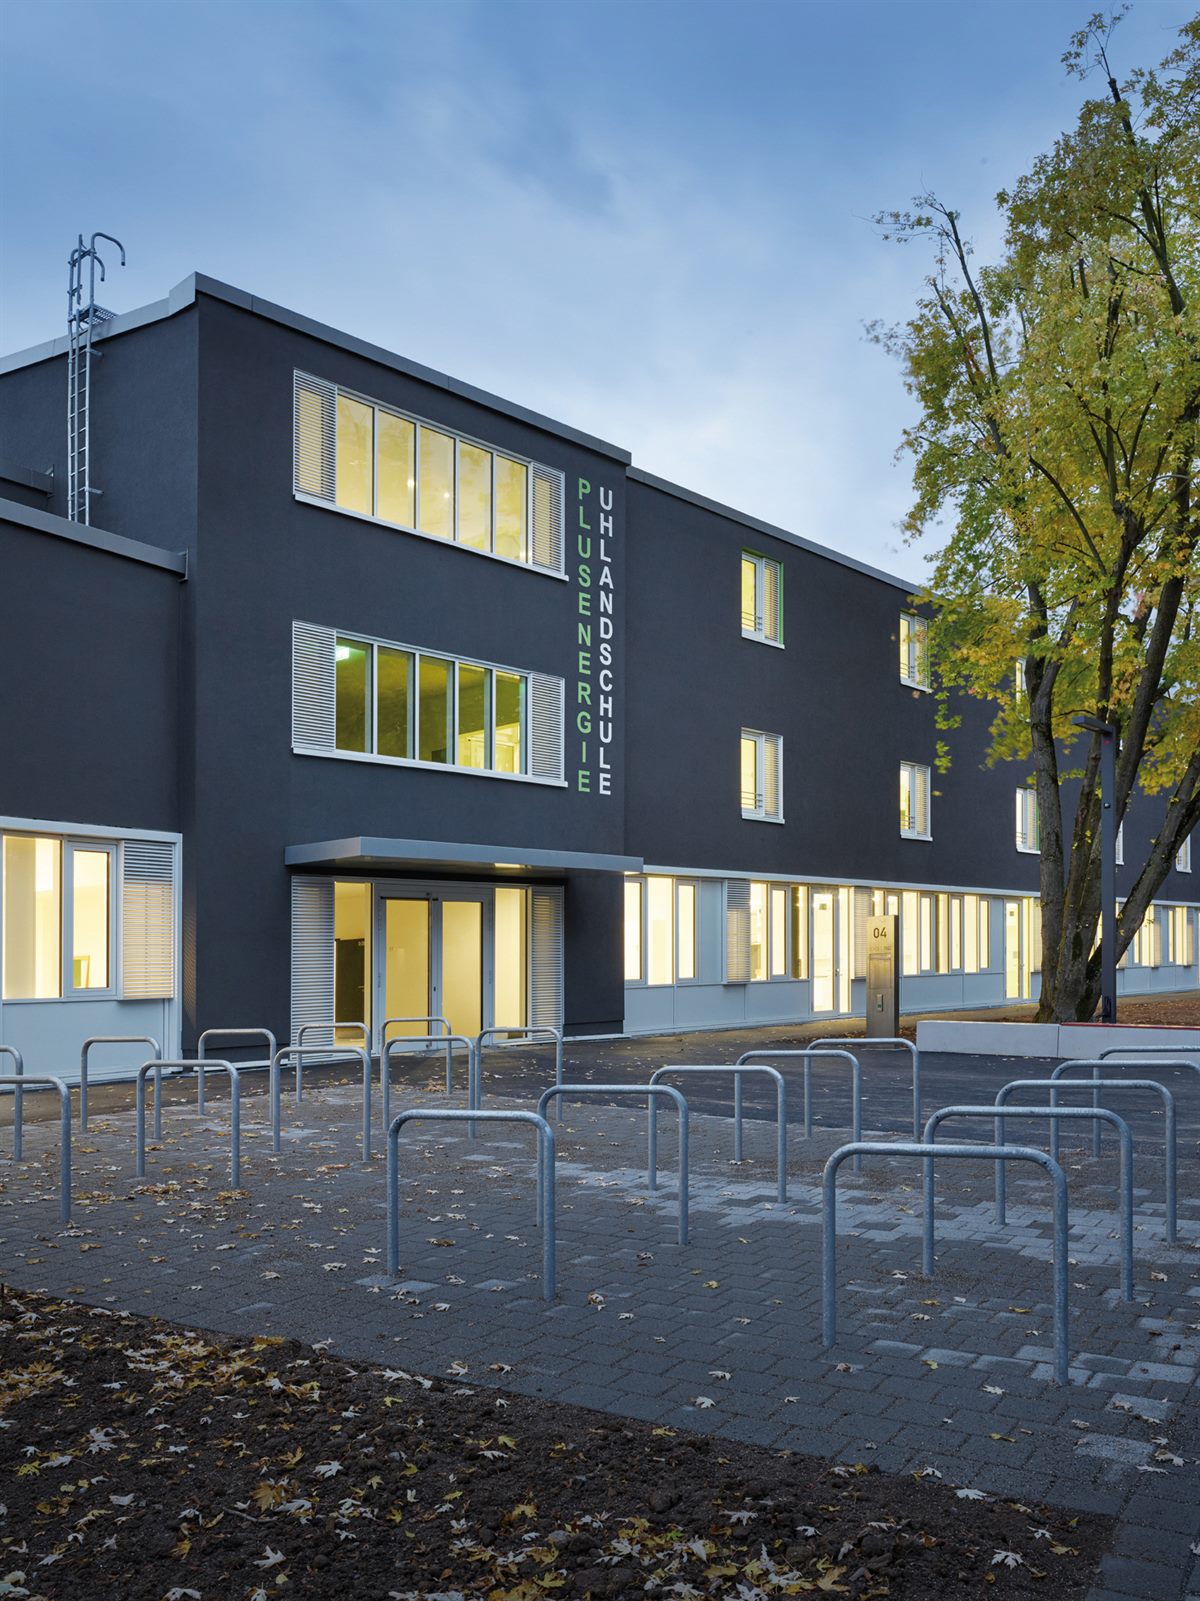 Uhlandschule_06_c_Olaf_Rohl